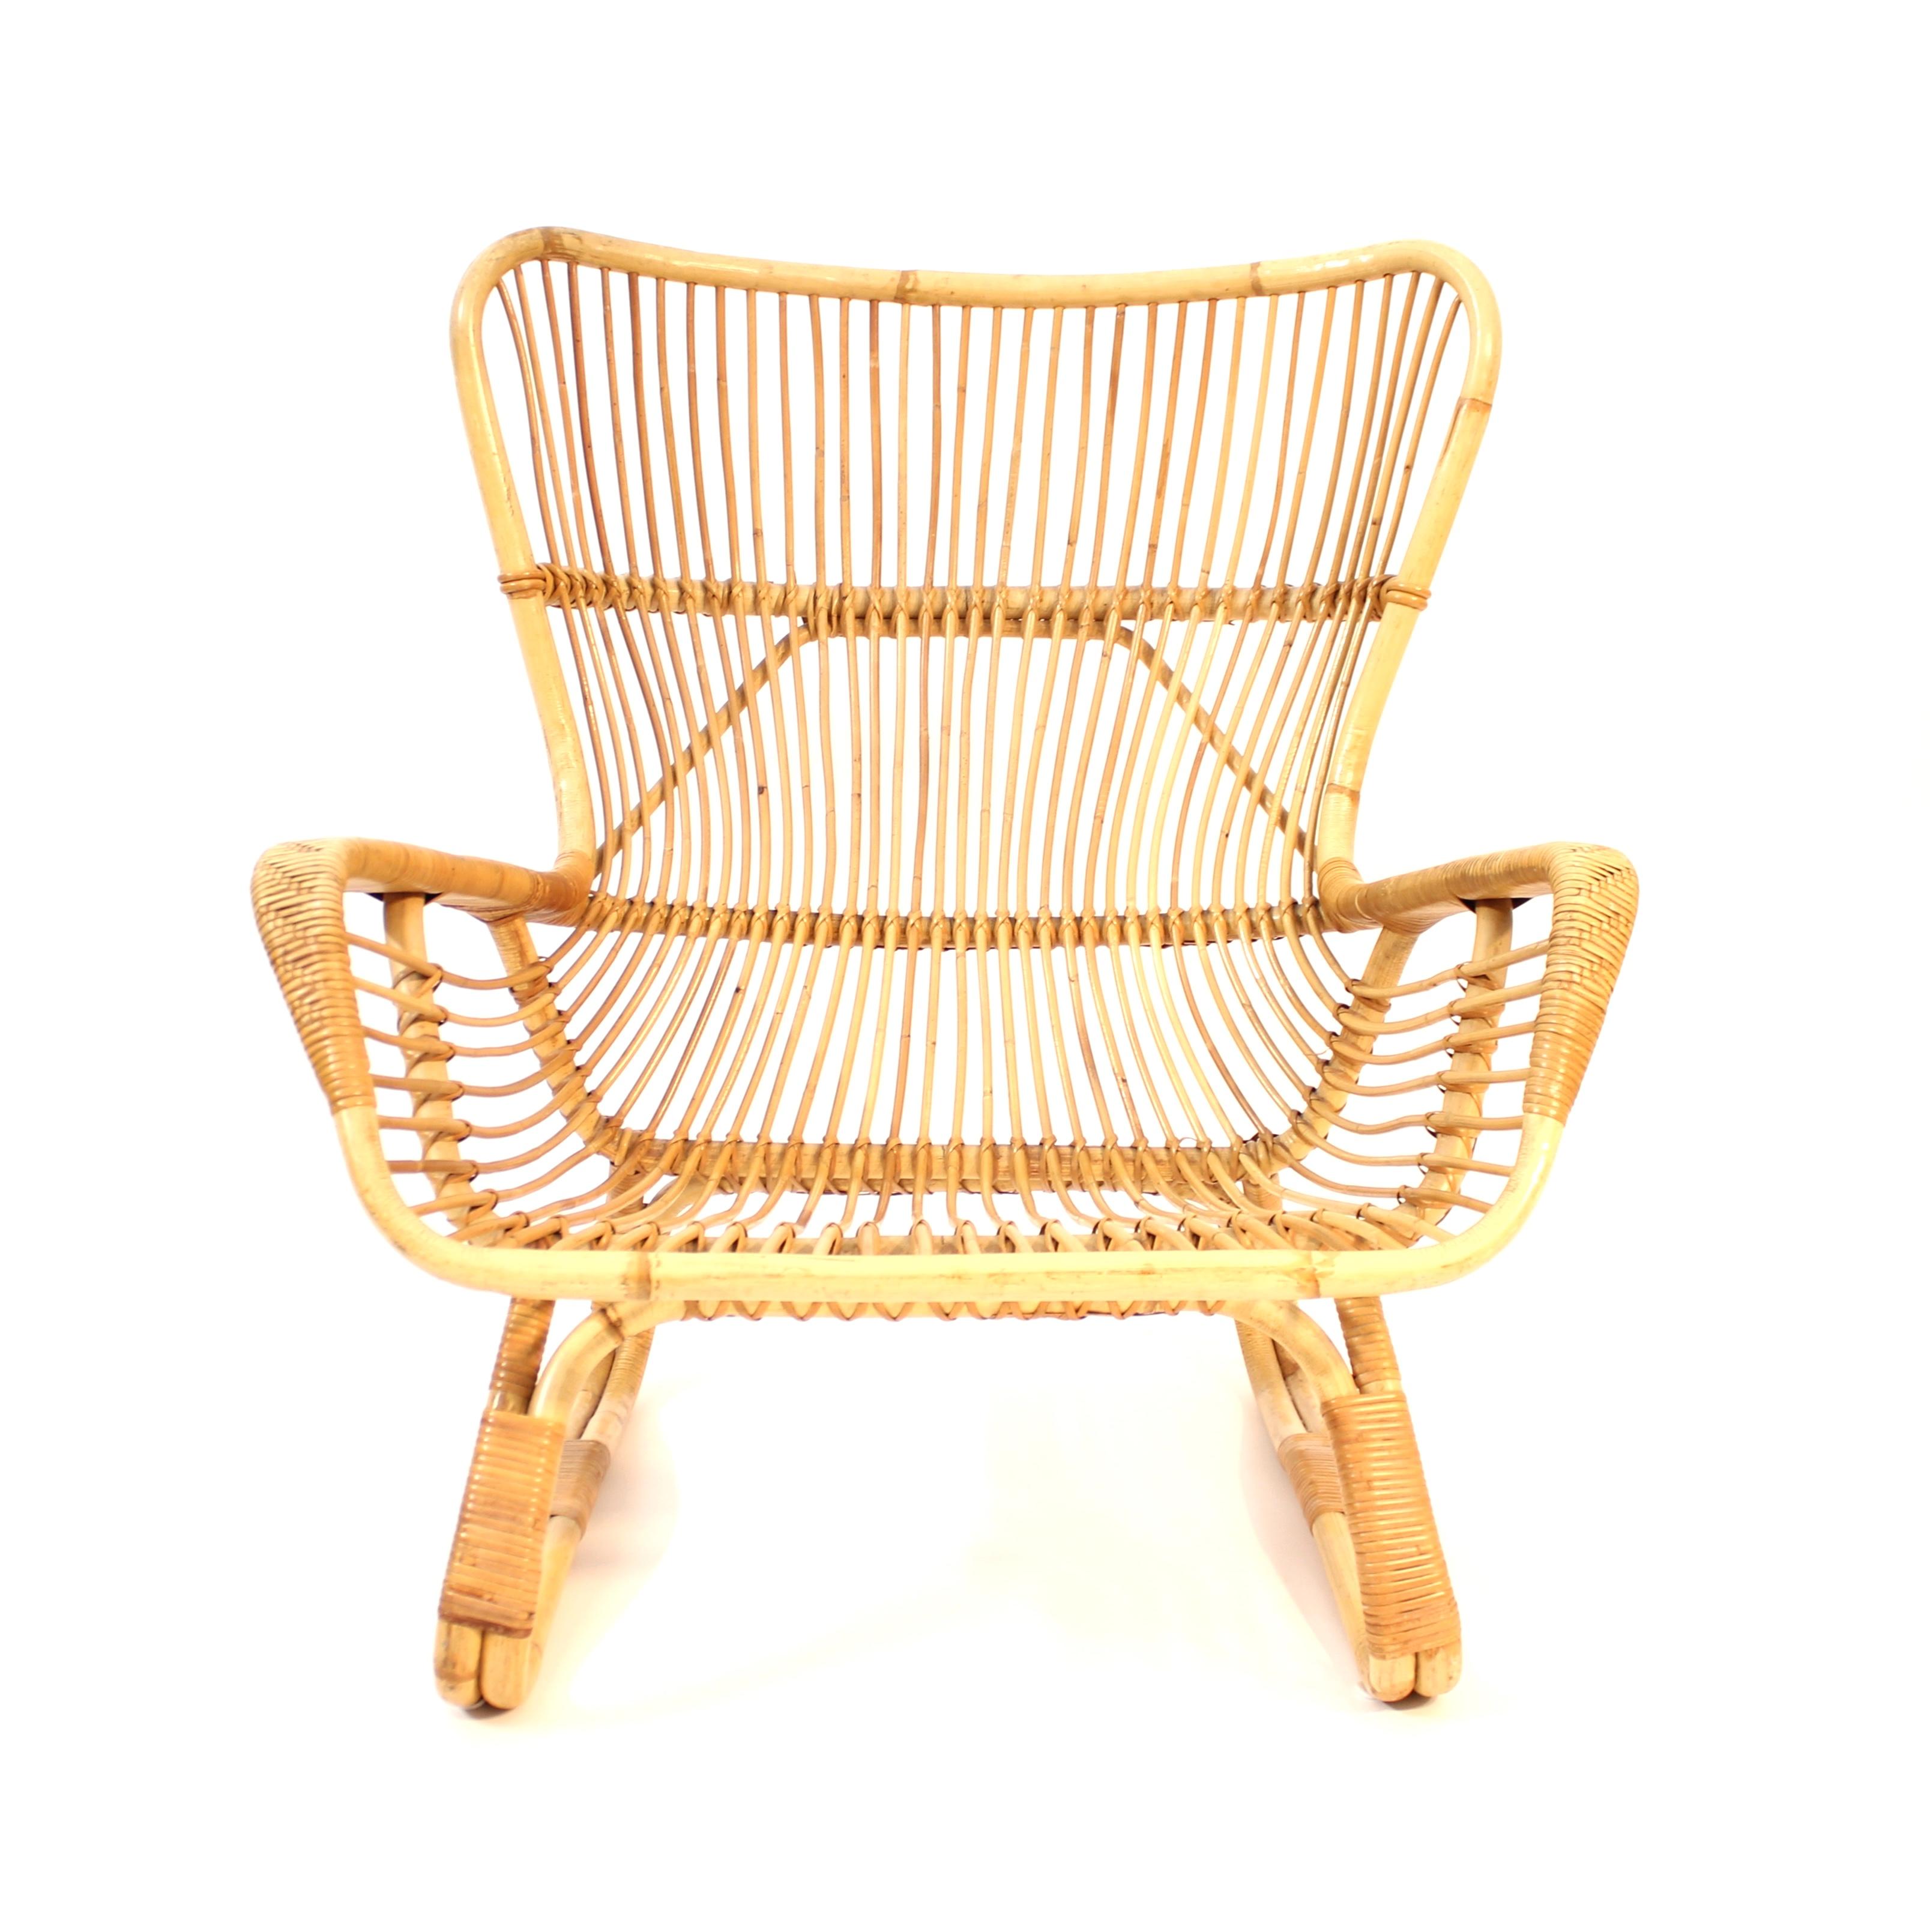 Large and cozy bambu and rattan chair from the mid-century. Rounded shapes of the whole frame. Unknown maker but feels very Italian in its shape and proportions. Very good untouched vintage condition with light ware consistent with age and use.